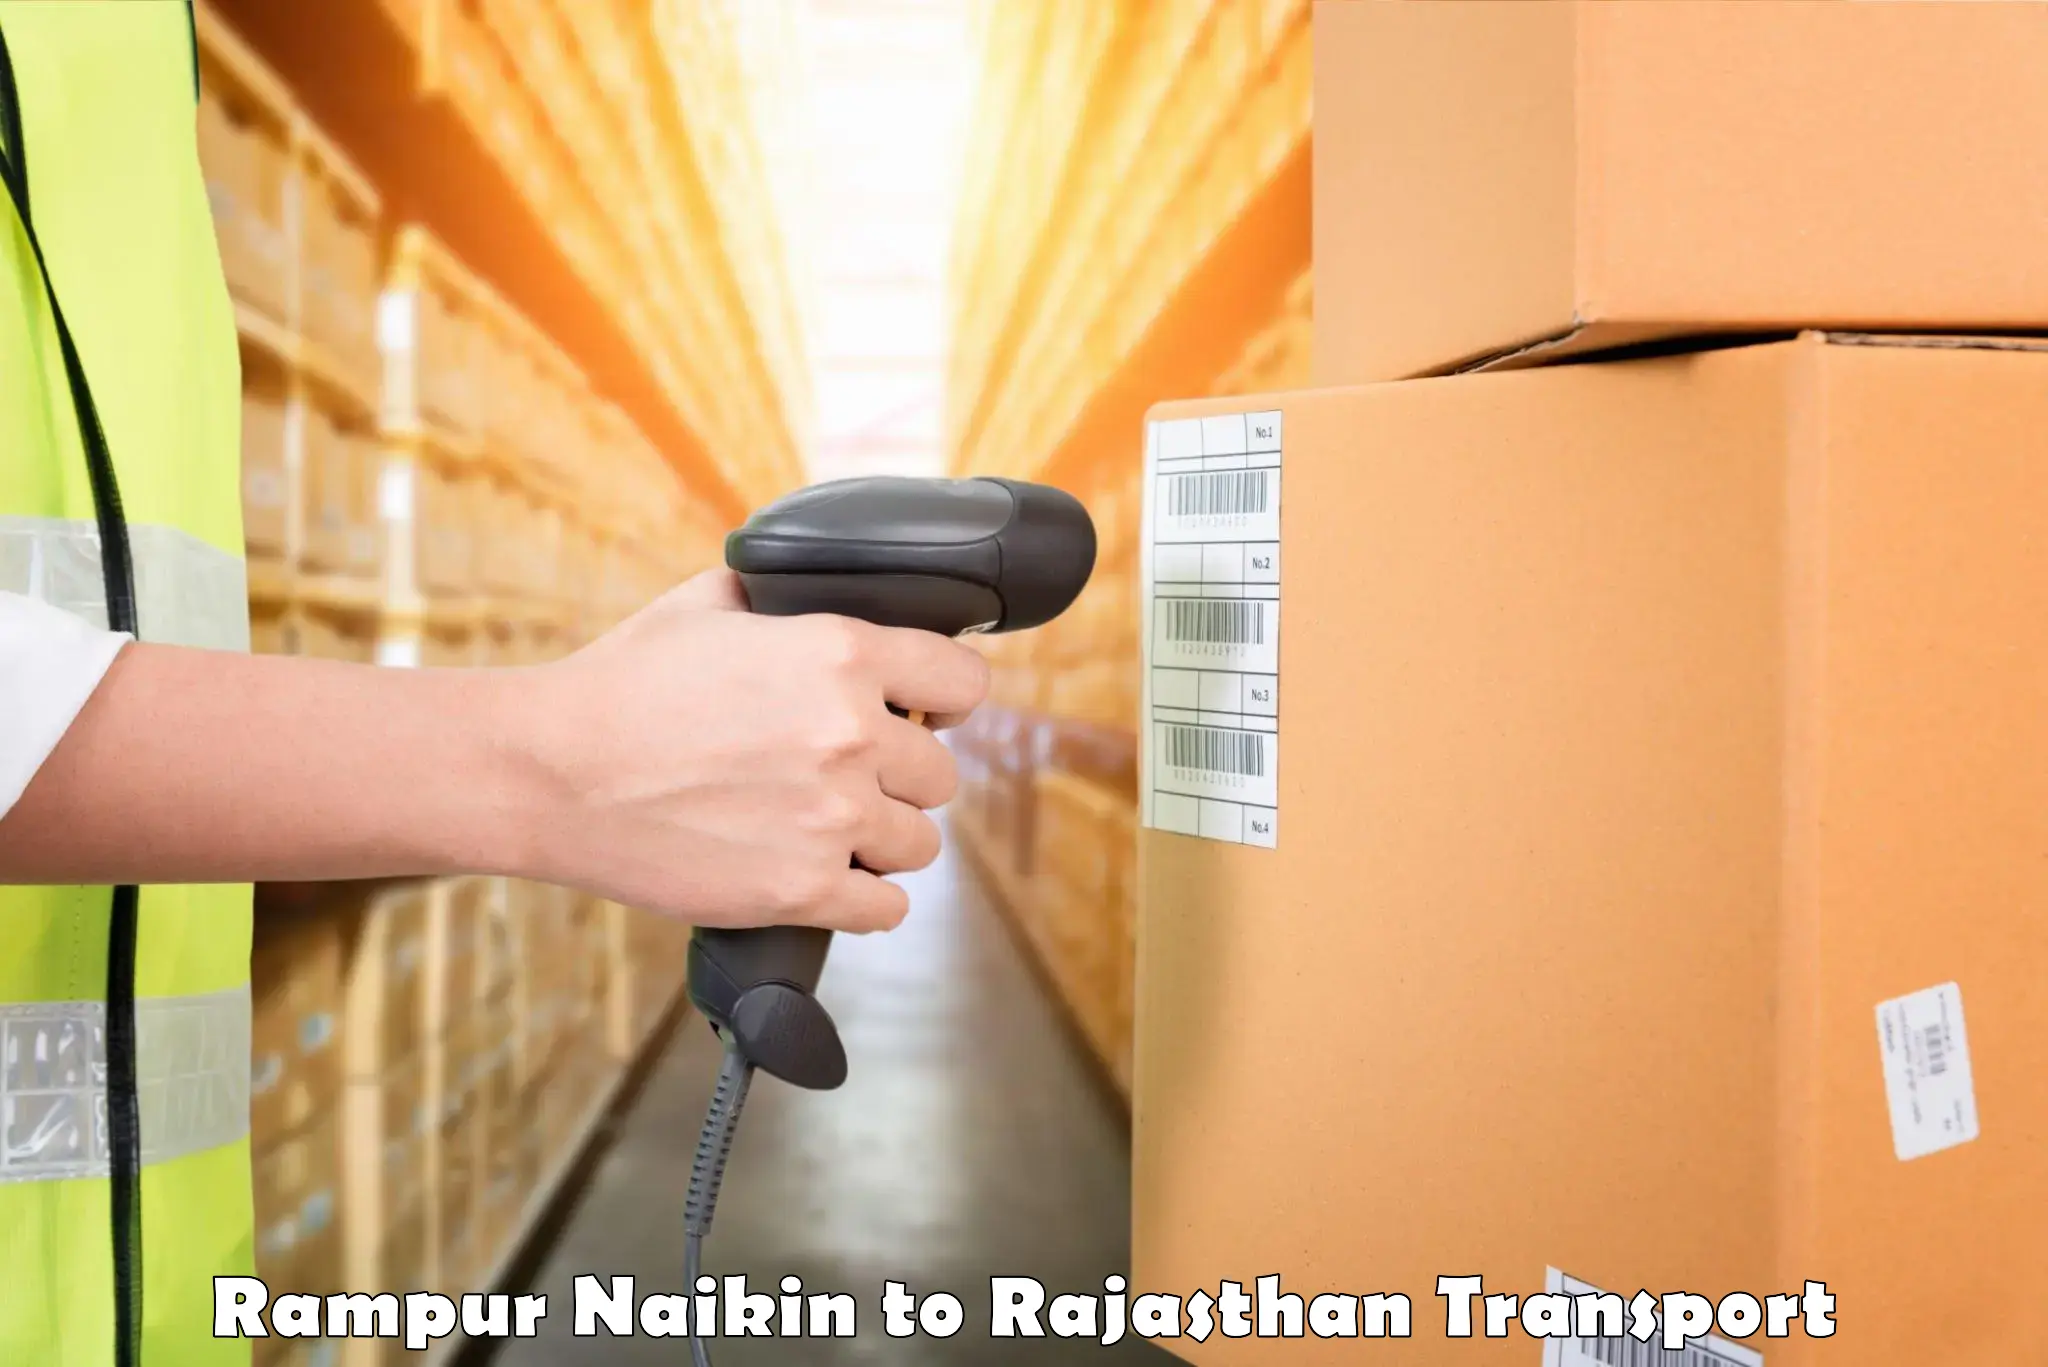 Cargo transport services Rampur Naikin to Piparcity